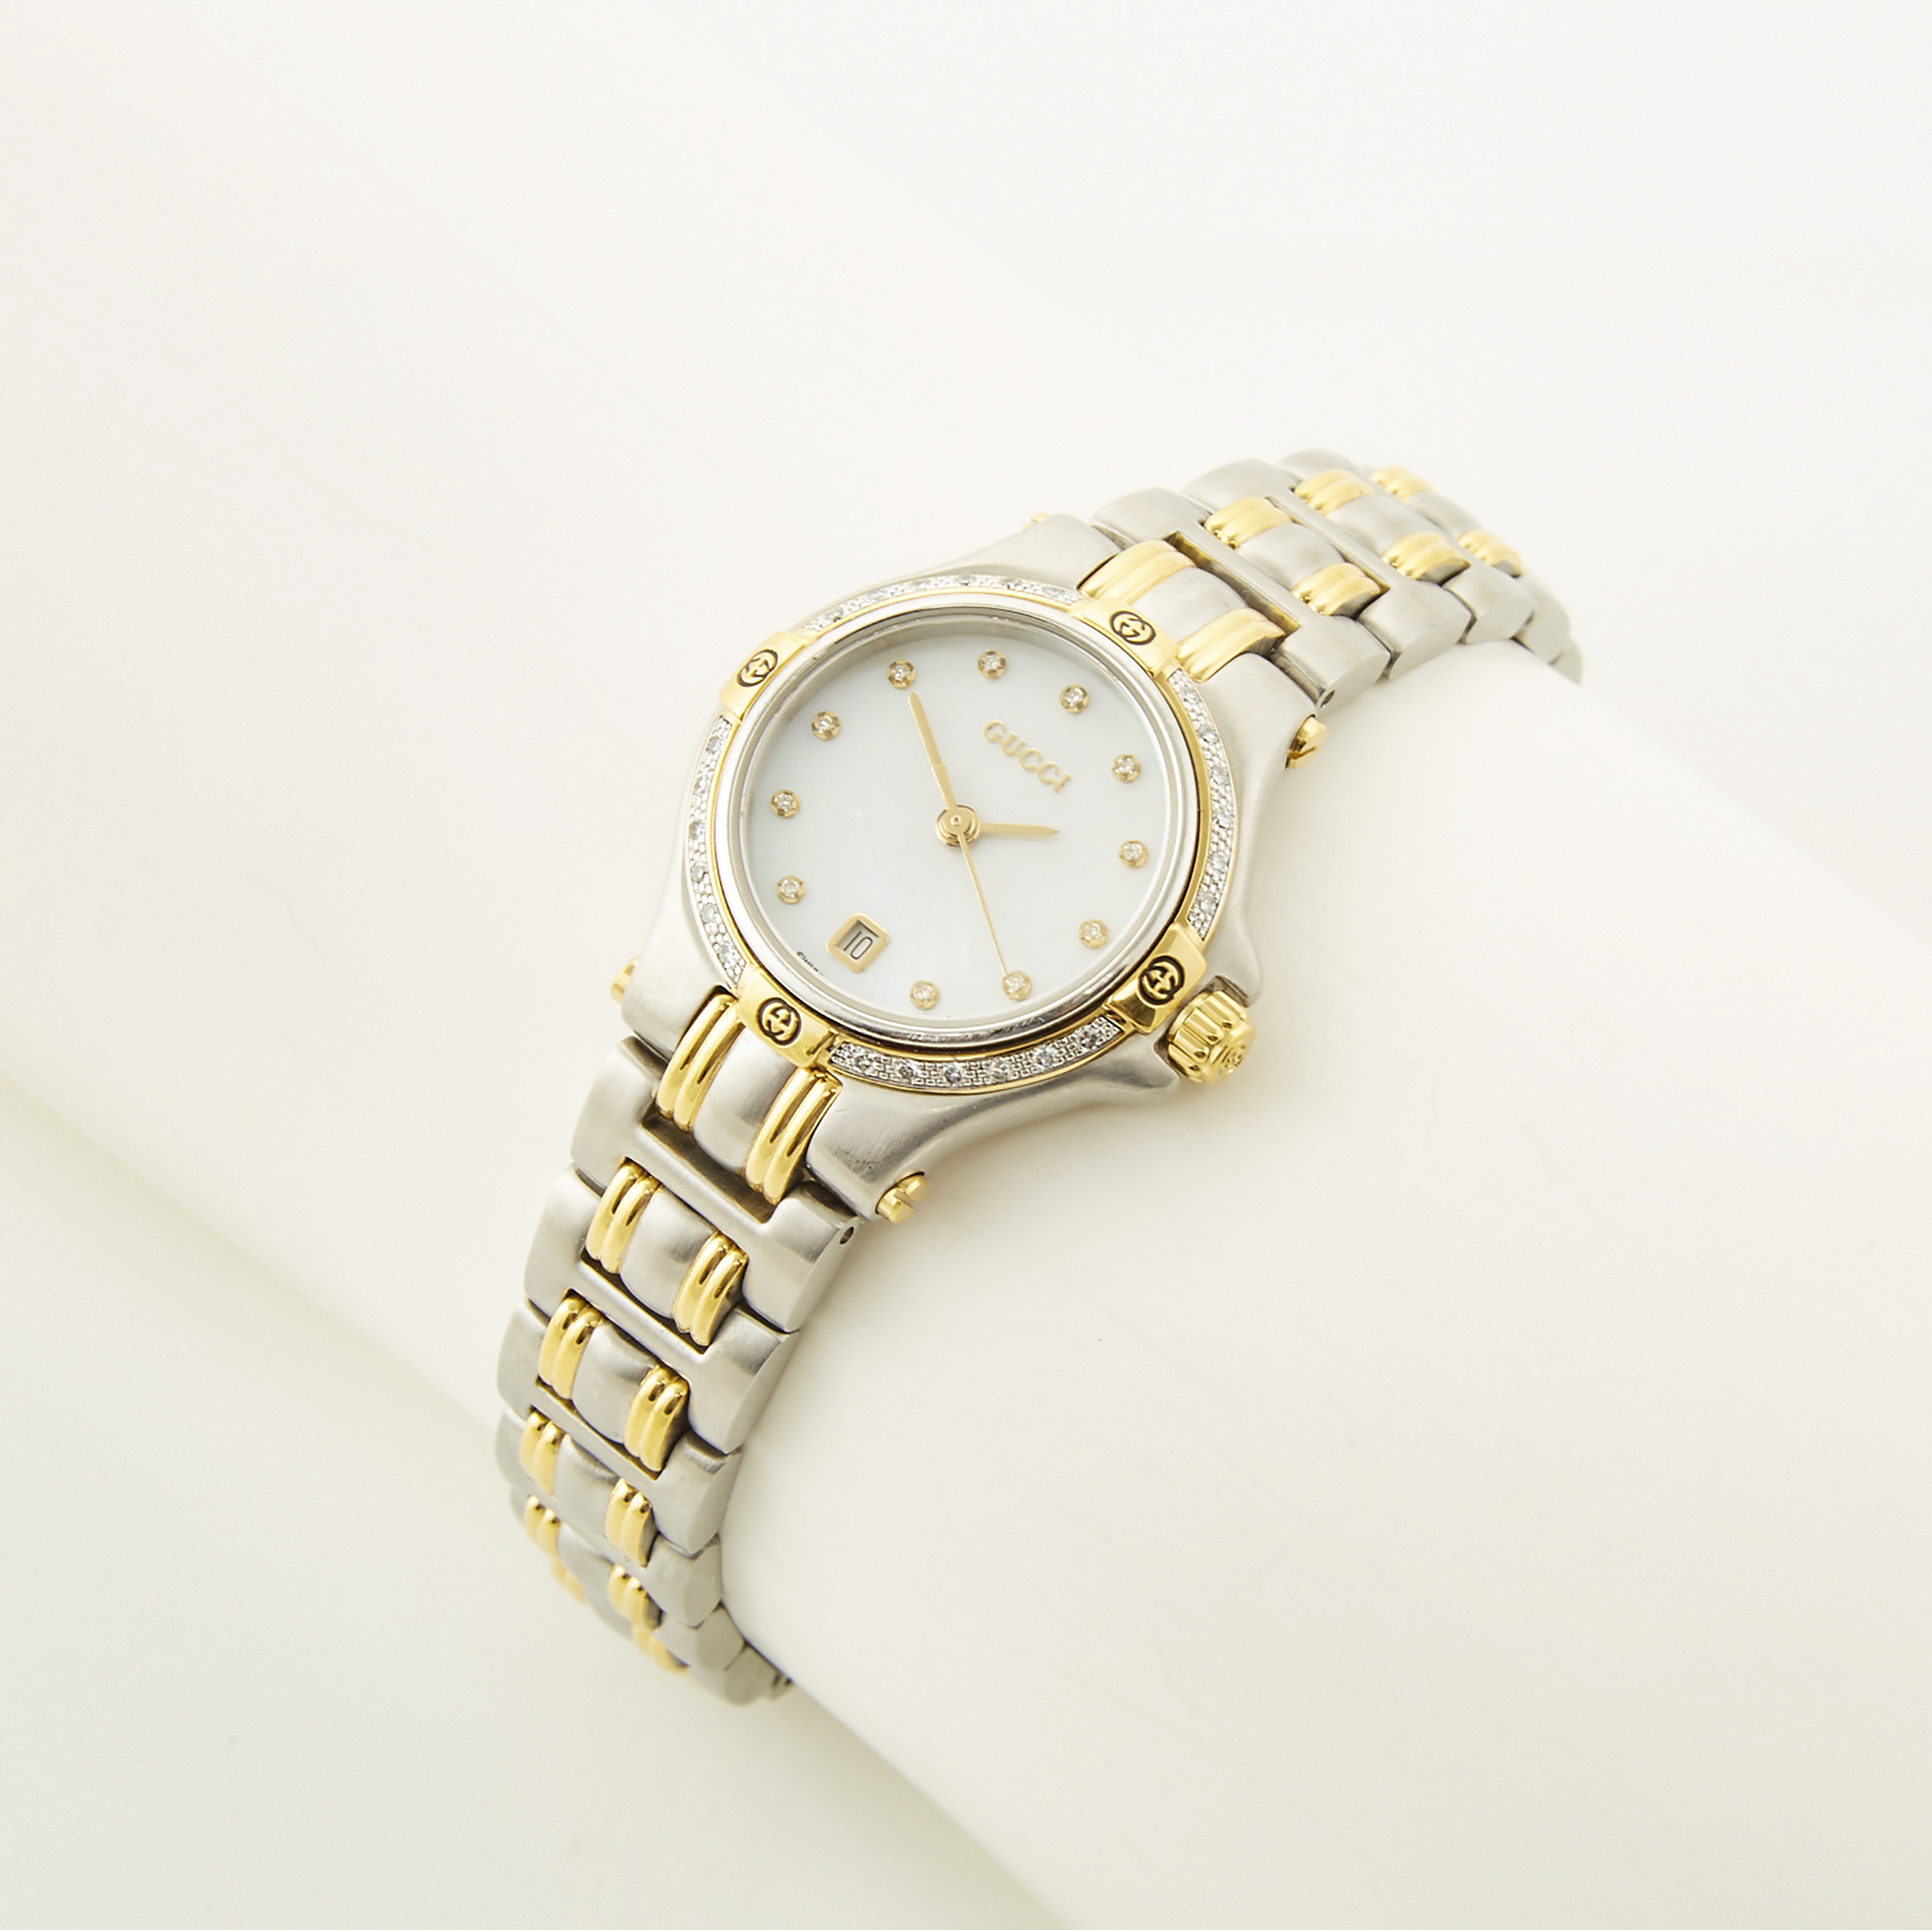 Lady's Gucci Wristwatch With Date